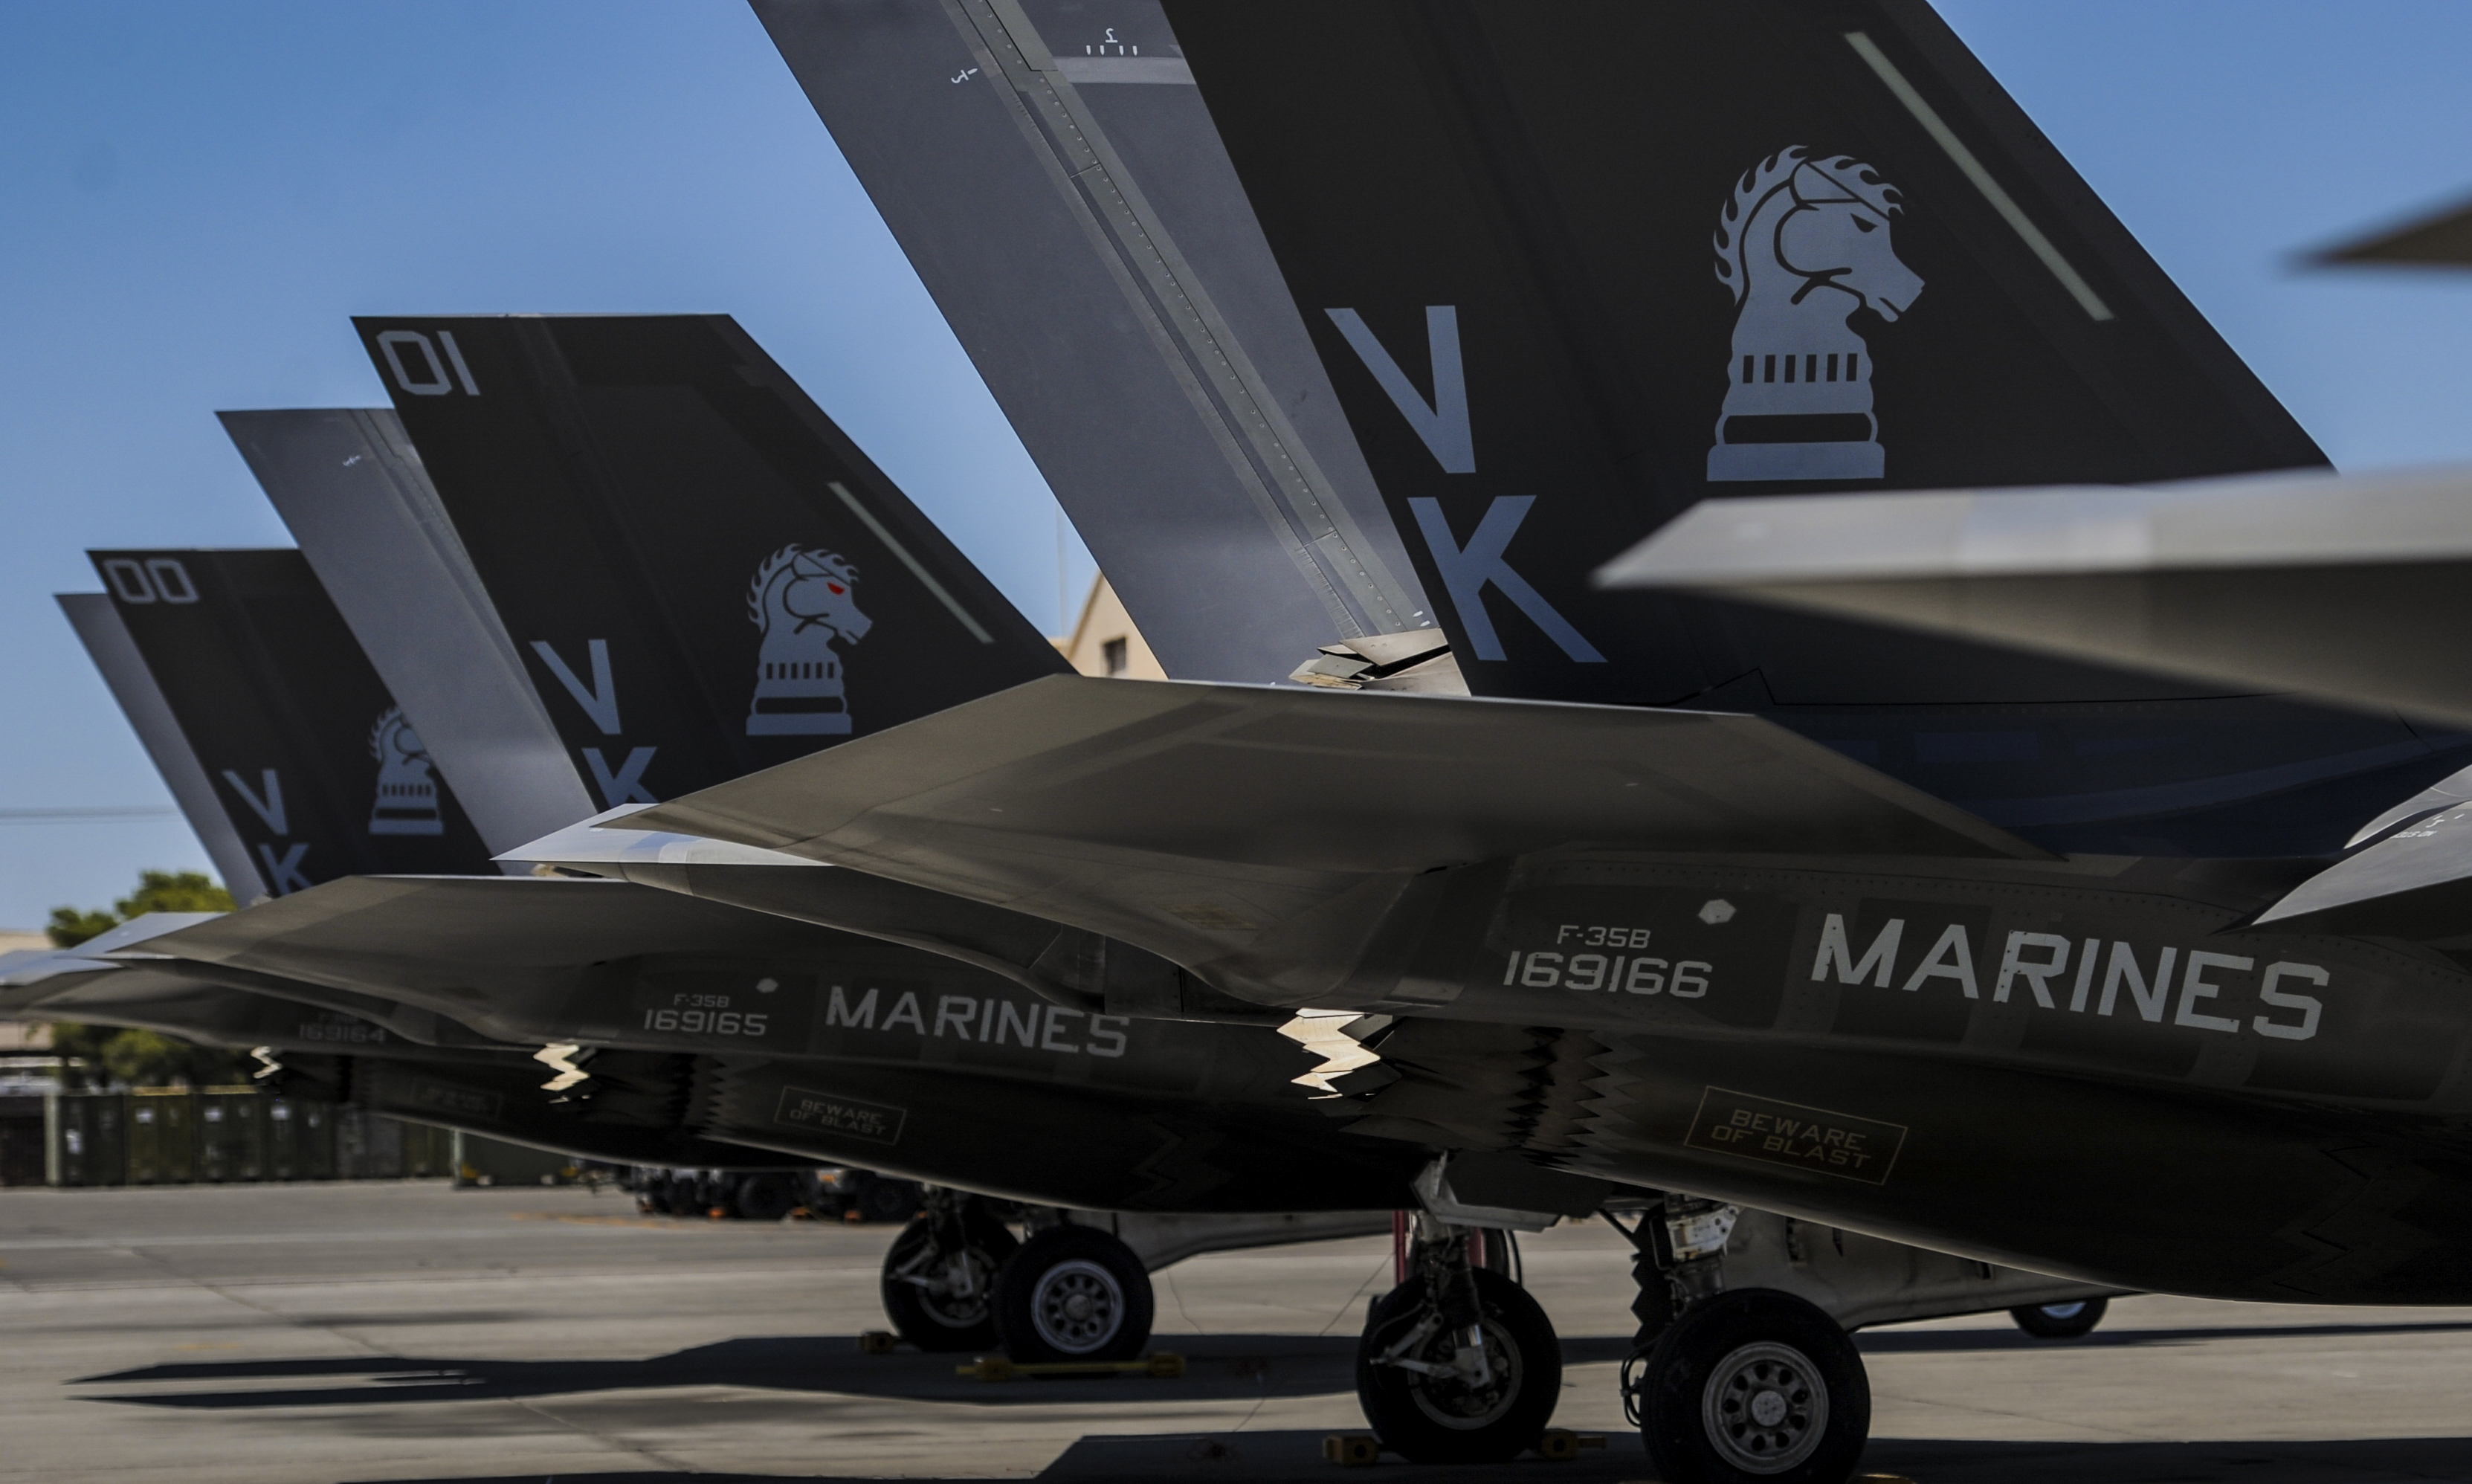 F-35Bs, assigned to the 3rd Marine Aircraft Wing, Marine Corps Air Station Yuma, Az., sit on the flightline during Red Flag 16-3 at Nellis Air Force Base, Nev on July 12, 2016. US Air Force Photo